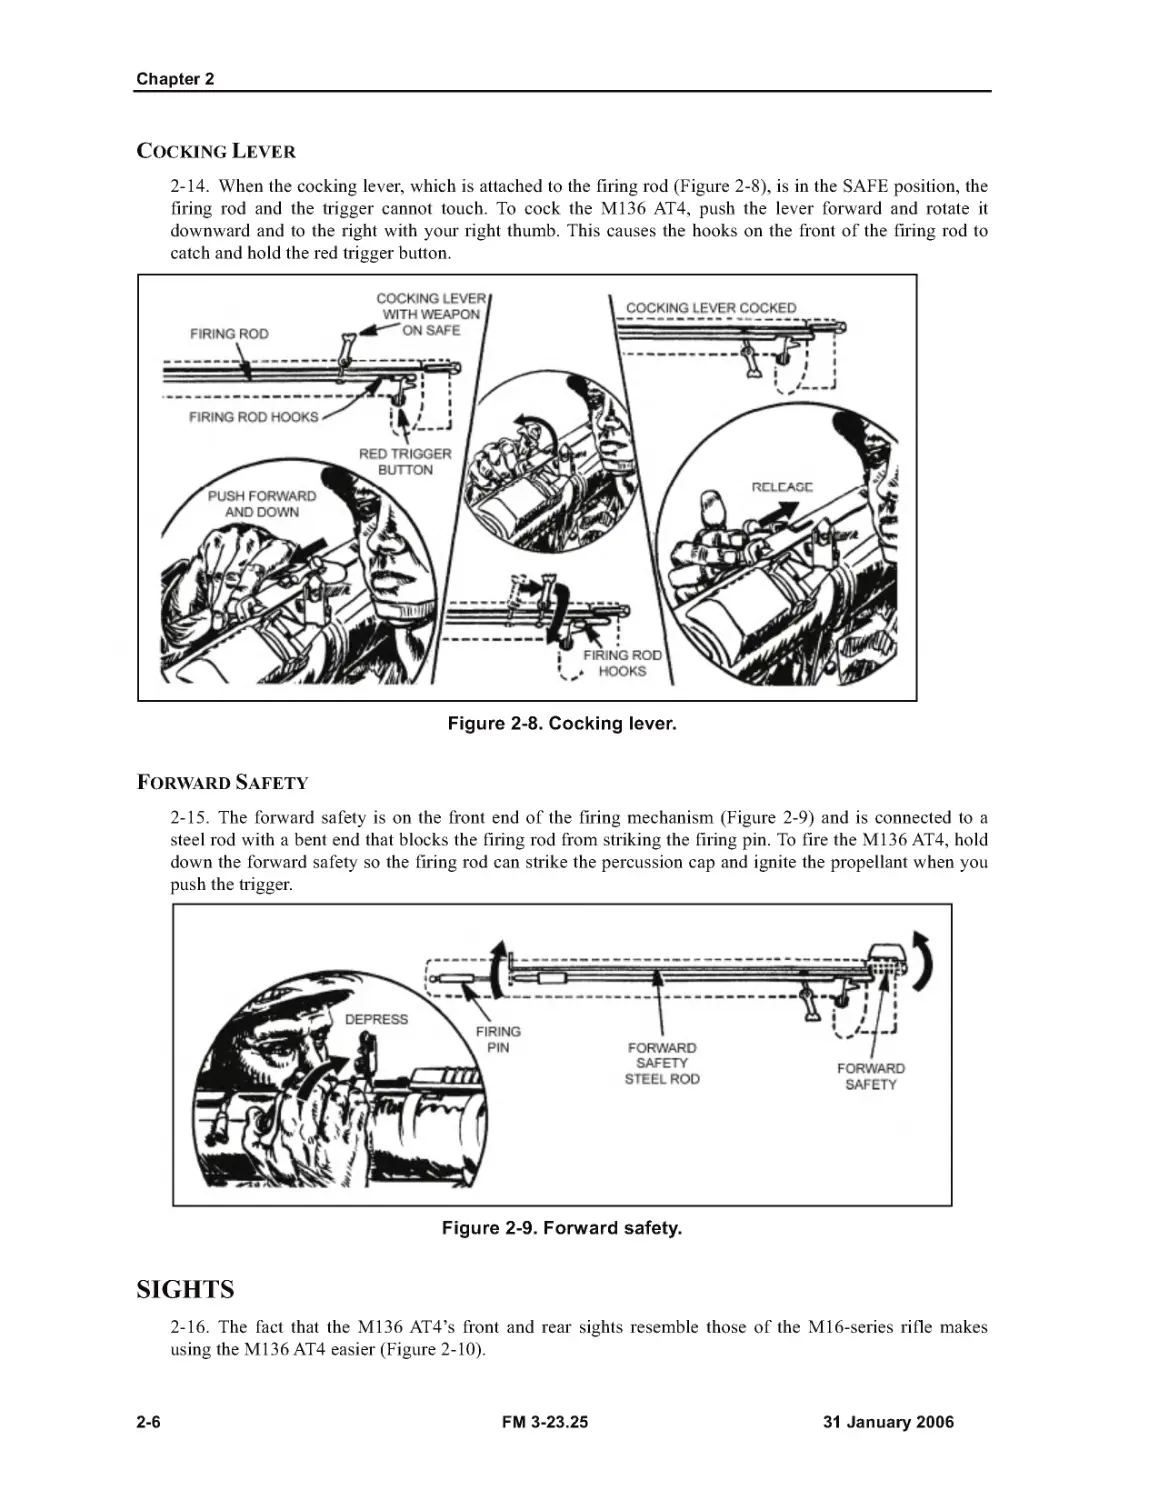 Figure 2-8. Cocking lever.
Figure 2-9. Forward safety.
SIGHTS